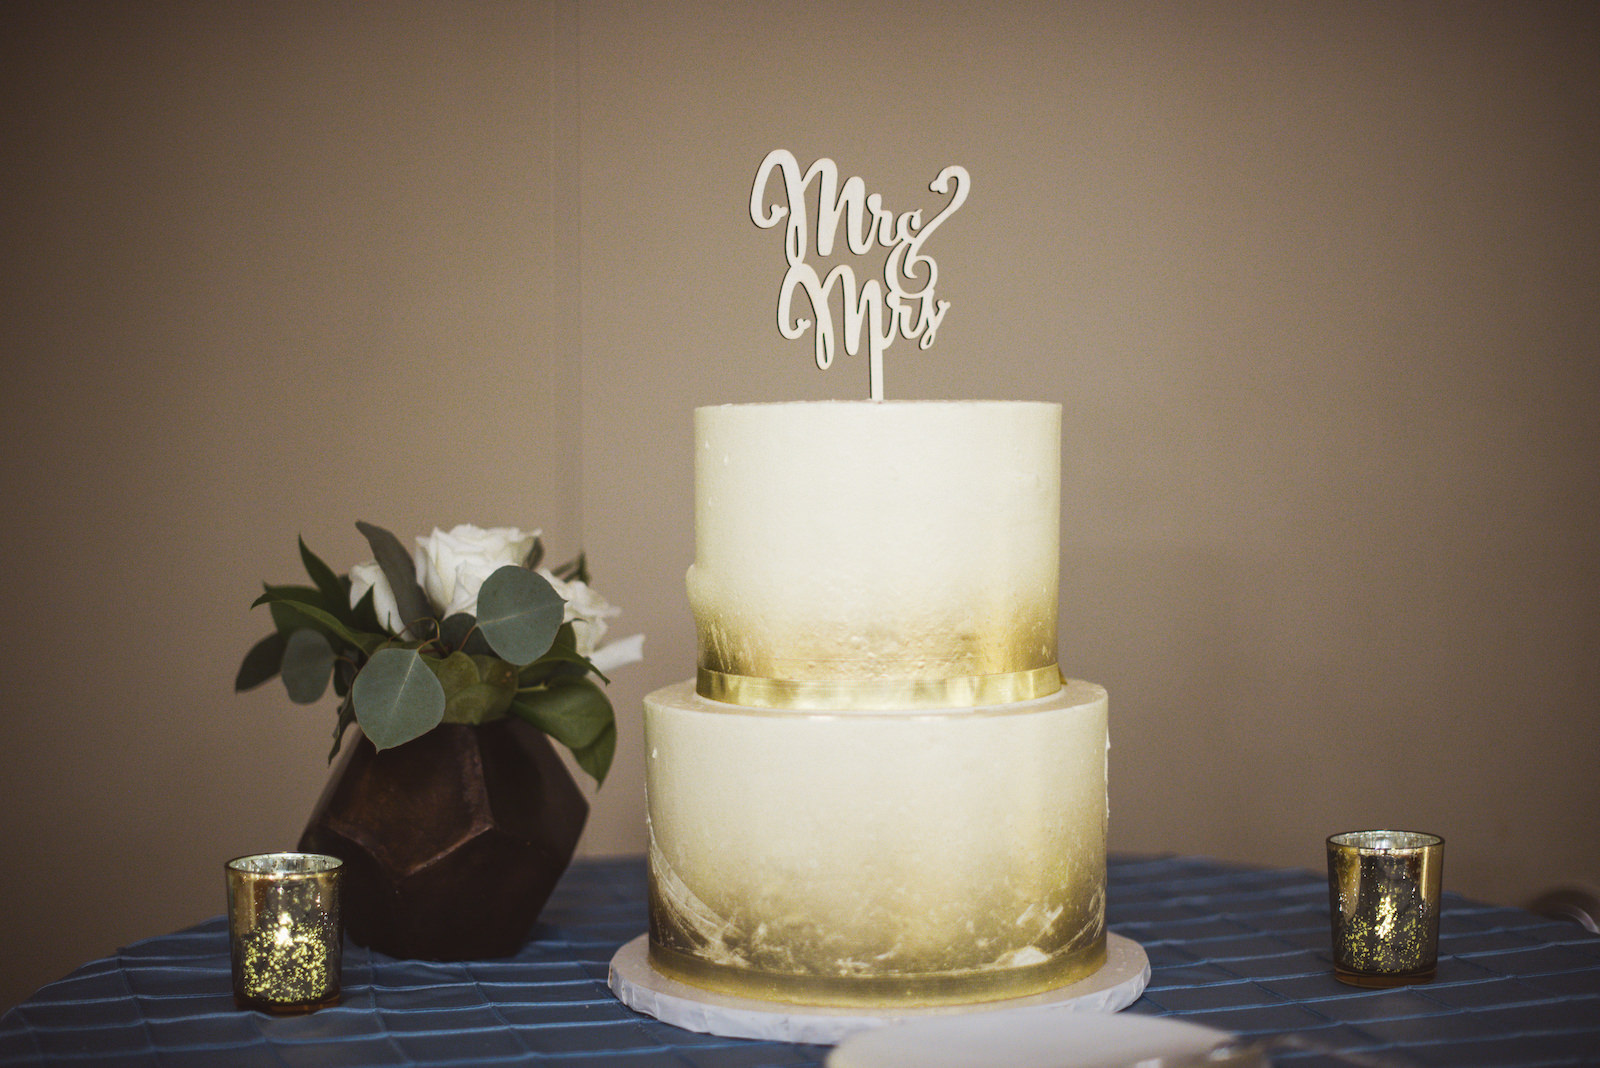 Elegant Two Tier White and Gold Painted Wedding Cake with Custom Cake Topper | Tampa Bay Wedding Baker The Artistic Whisk